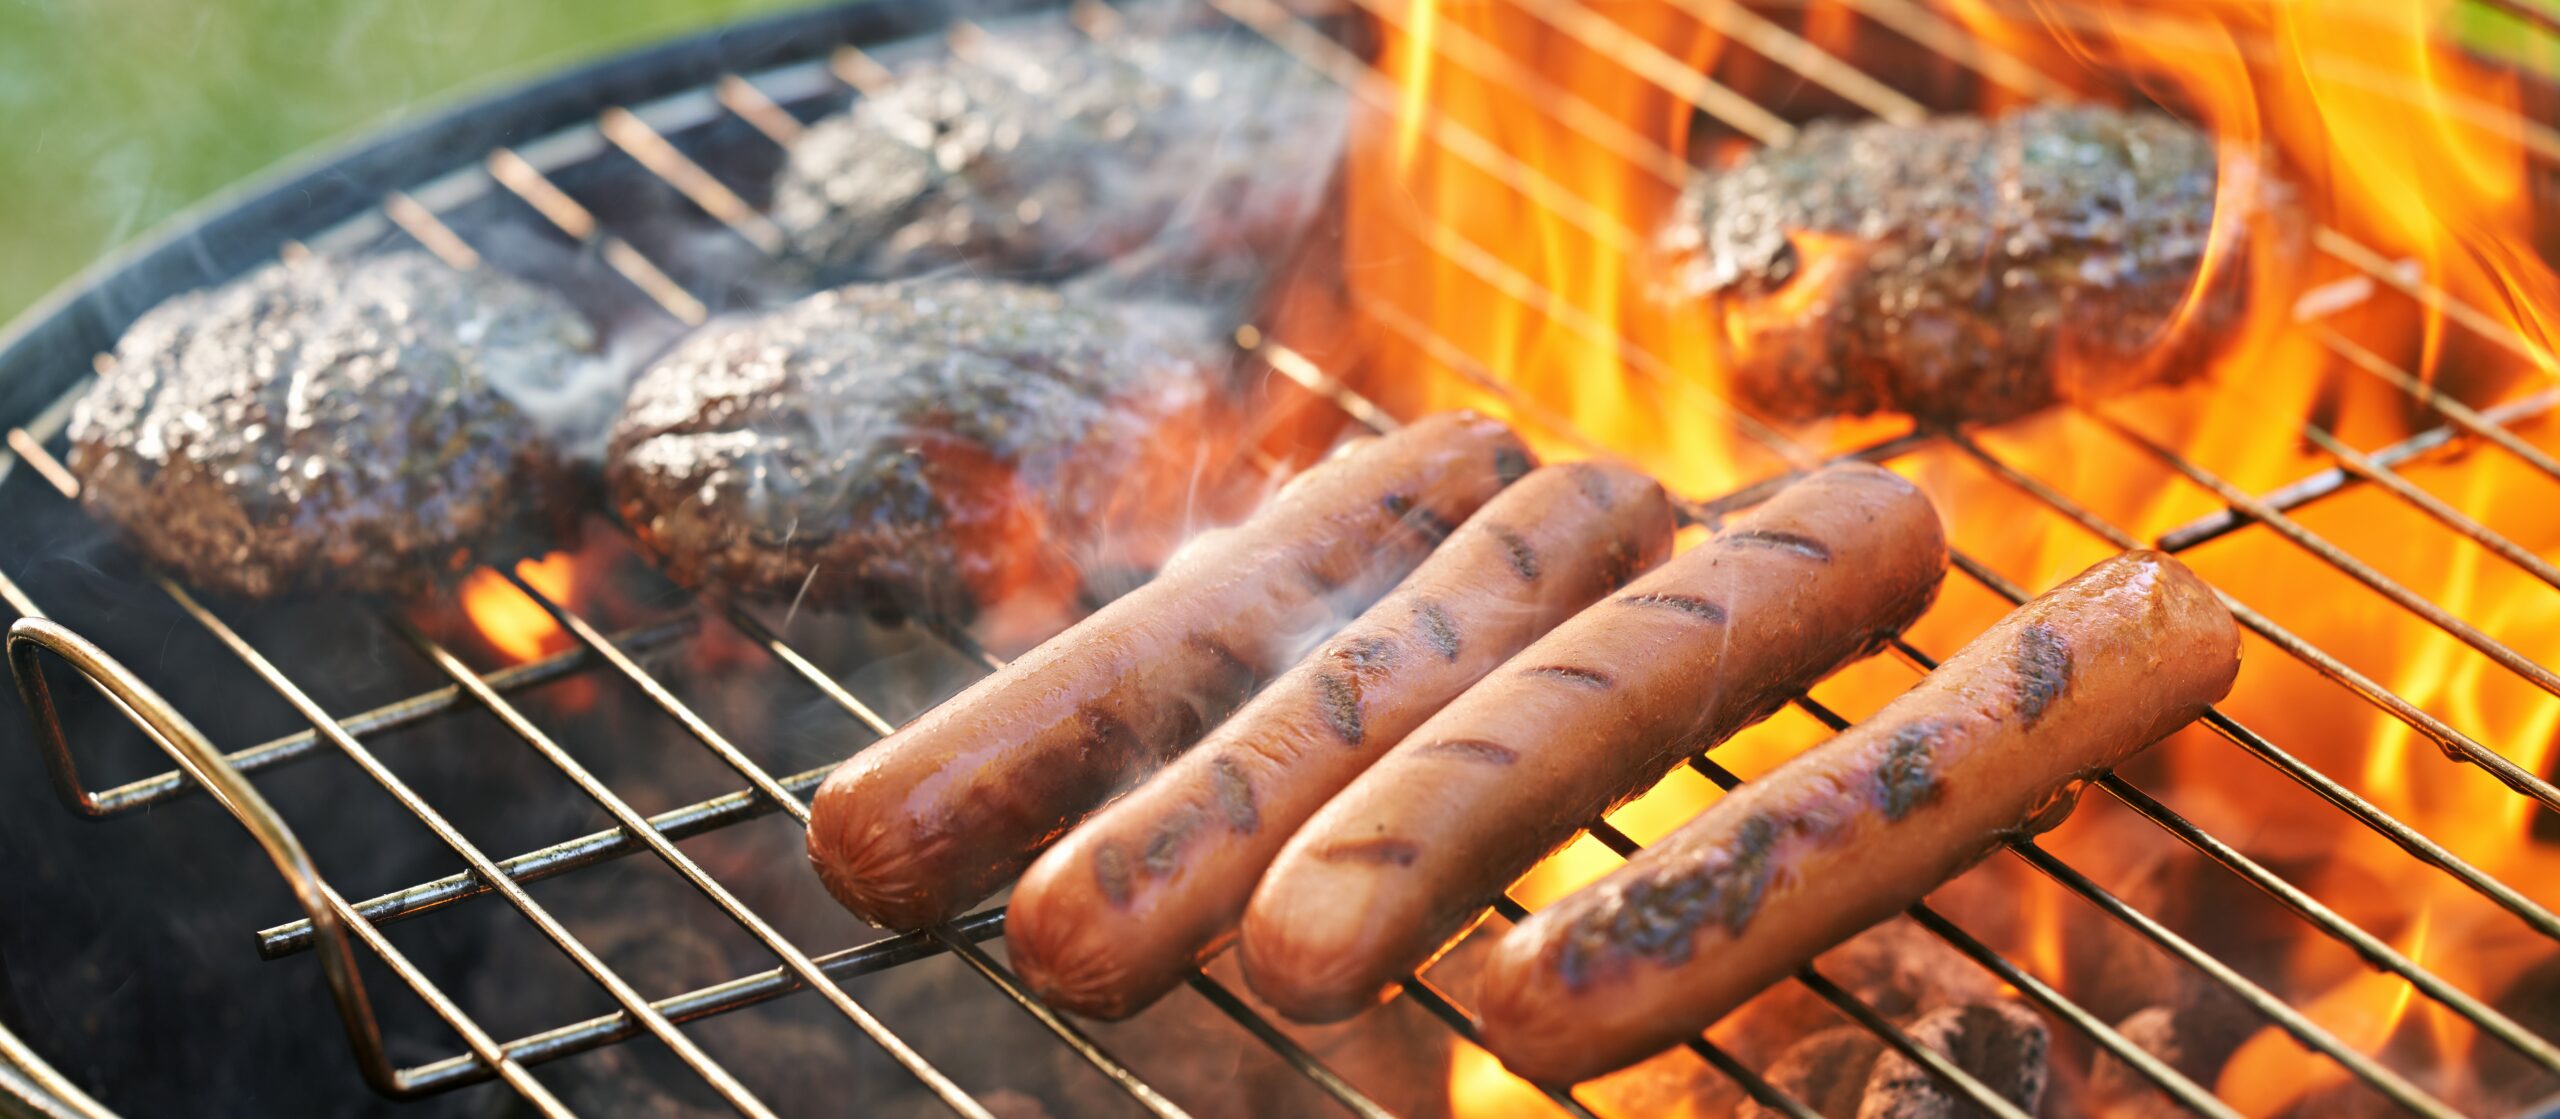 prepare-hot-dogs-faster-on-the-grill-with-this-hack